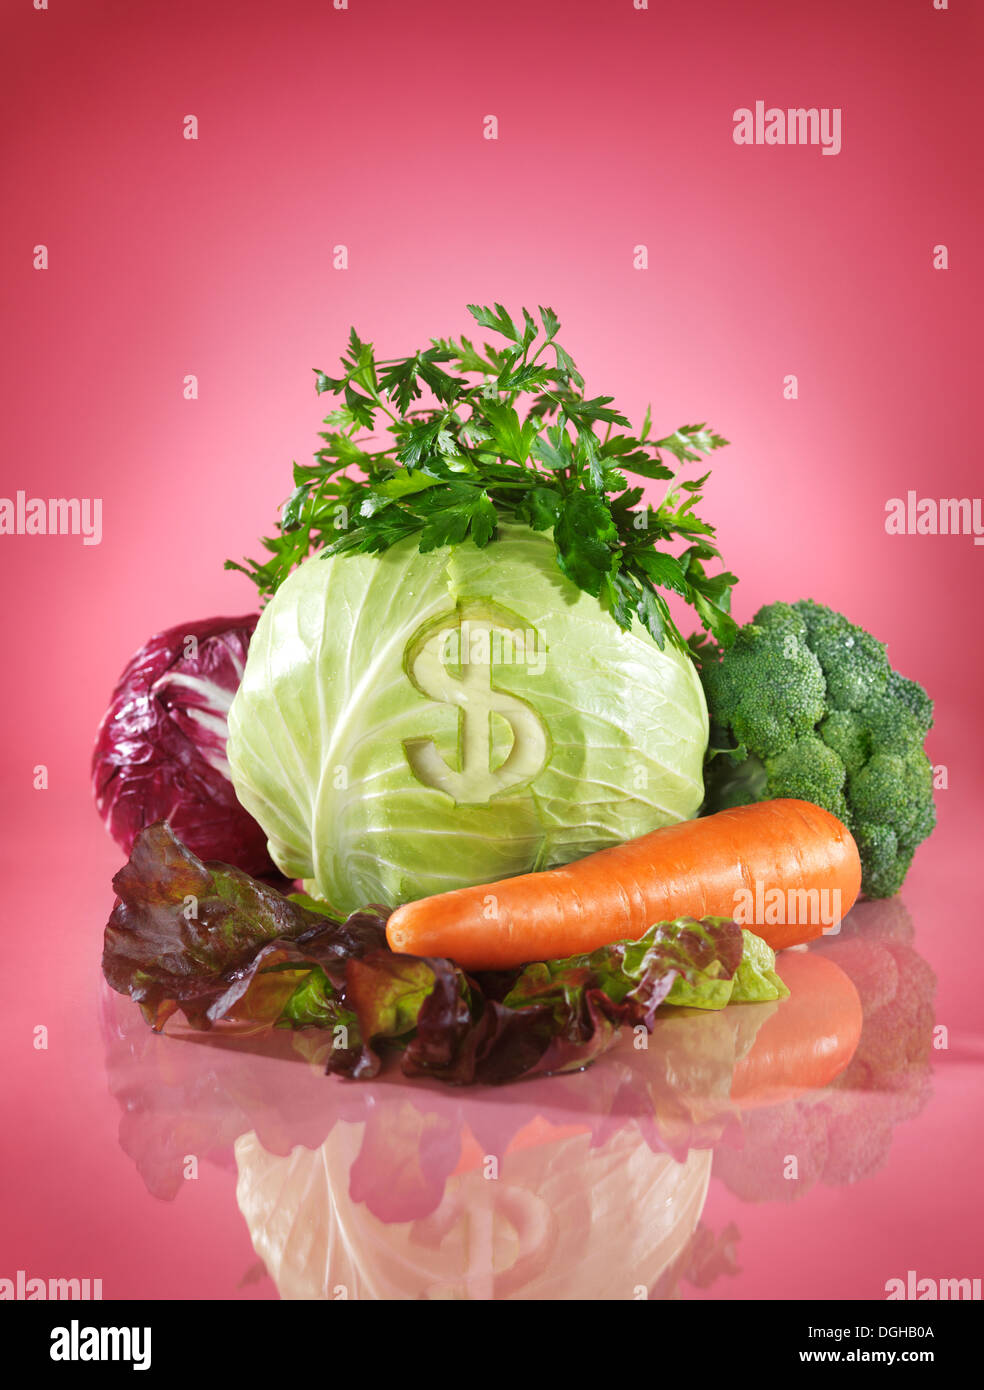 Dollar symbol on cabbage. Healthy eating and money savings food price concept. Isolated on pink background. Stock Photo